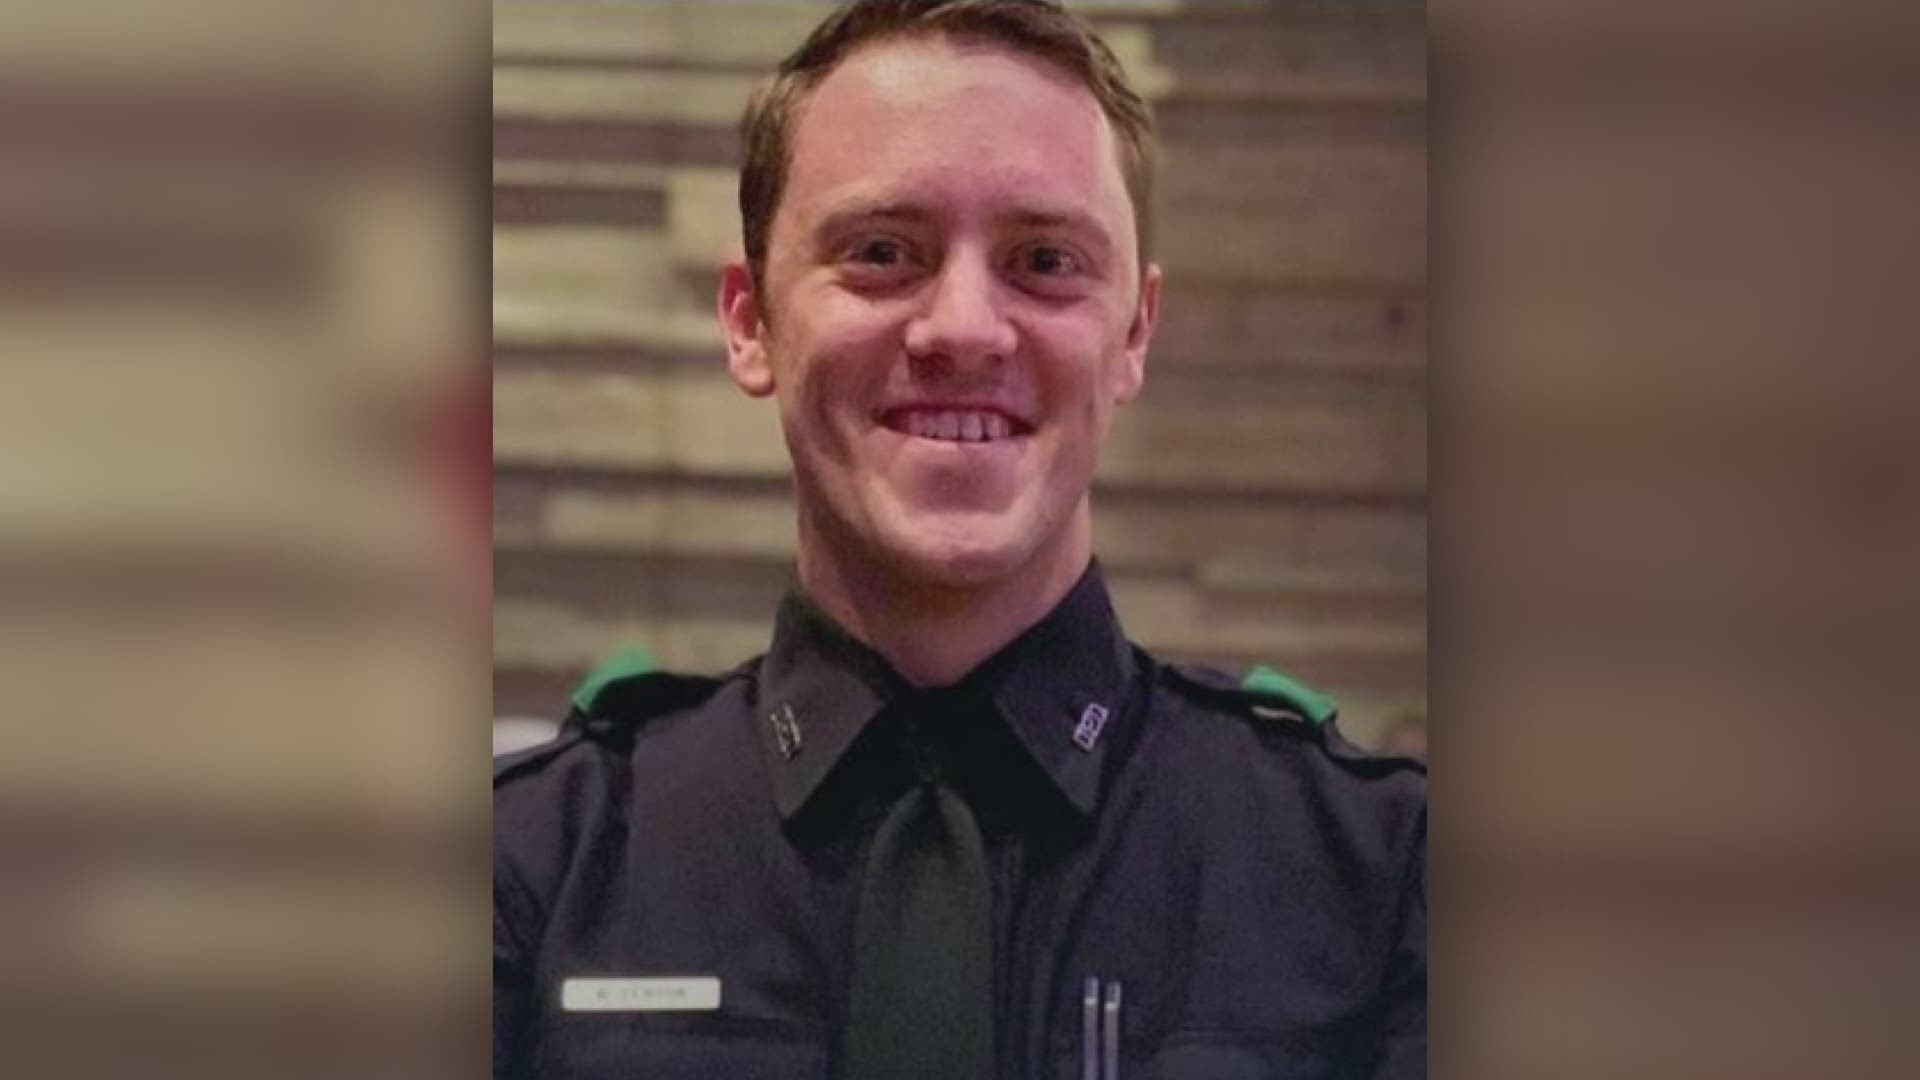 Authorities said Officer Mitchell Penton had his emergency lights on at the time of the incident. He had been with the department since 2019.